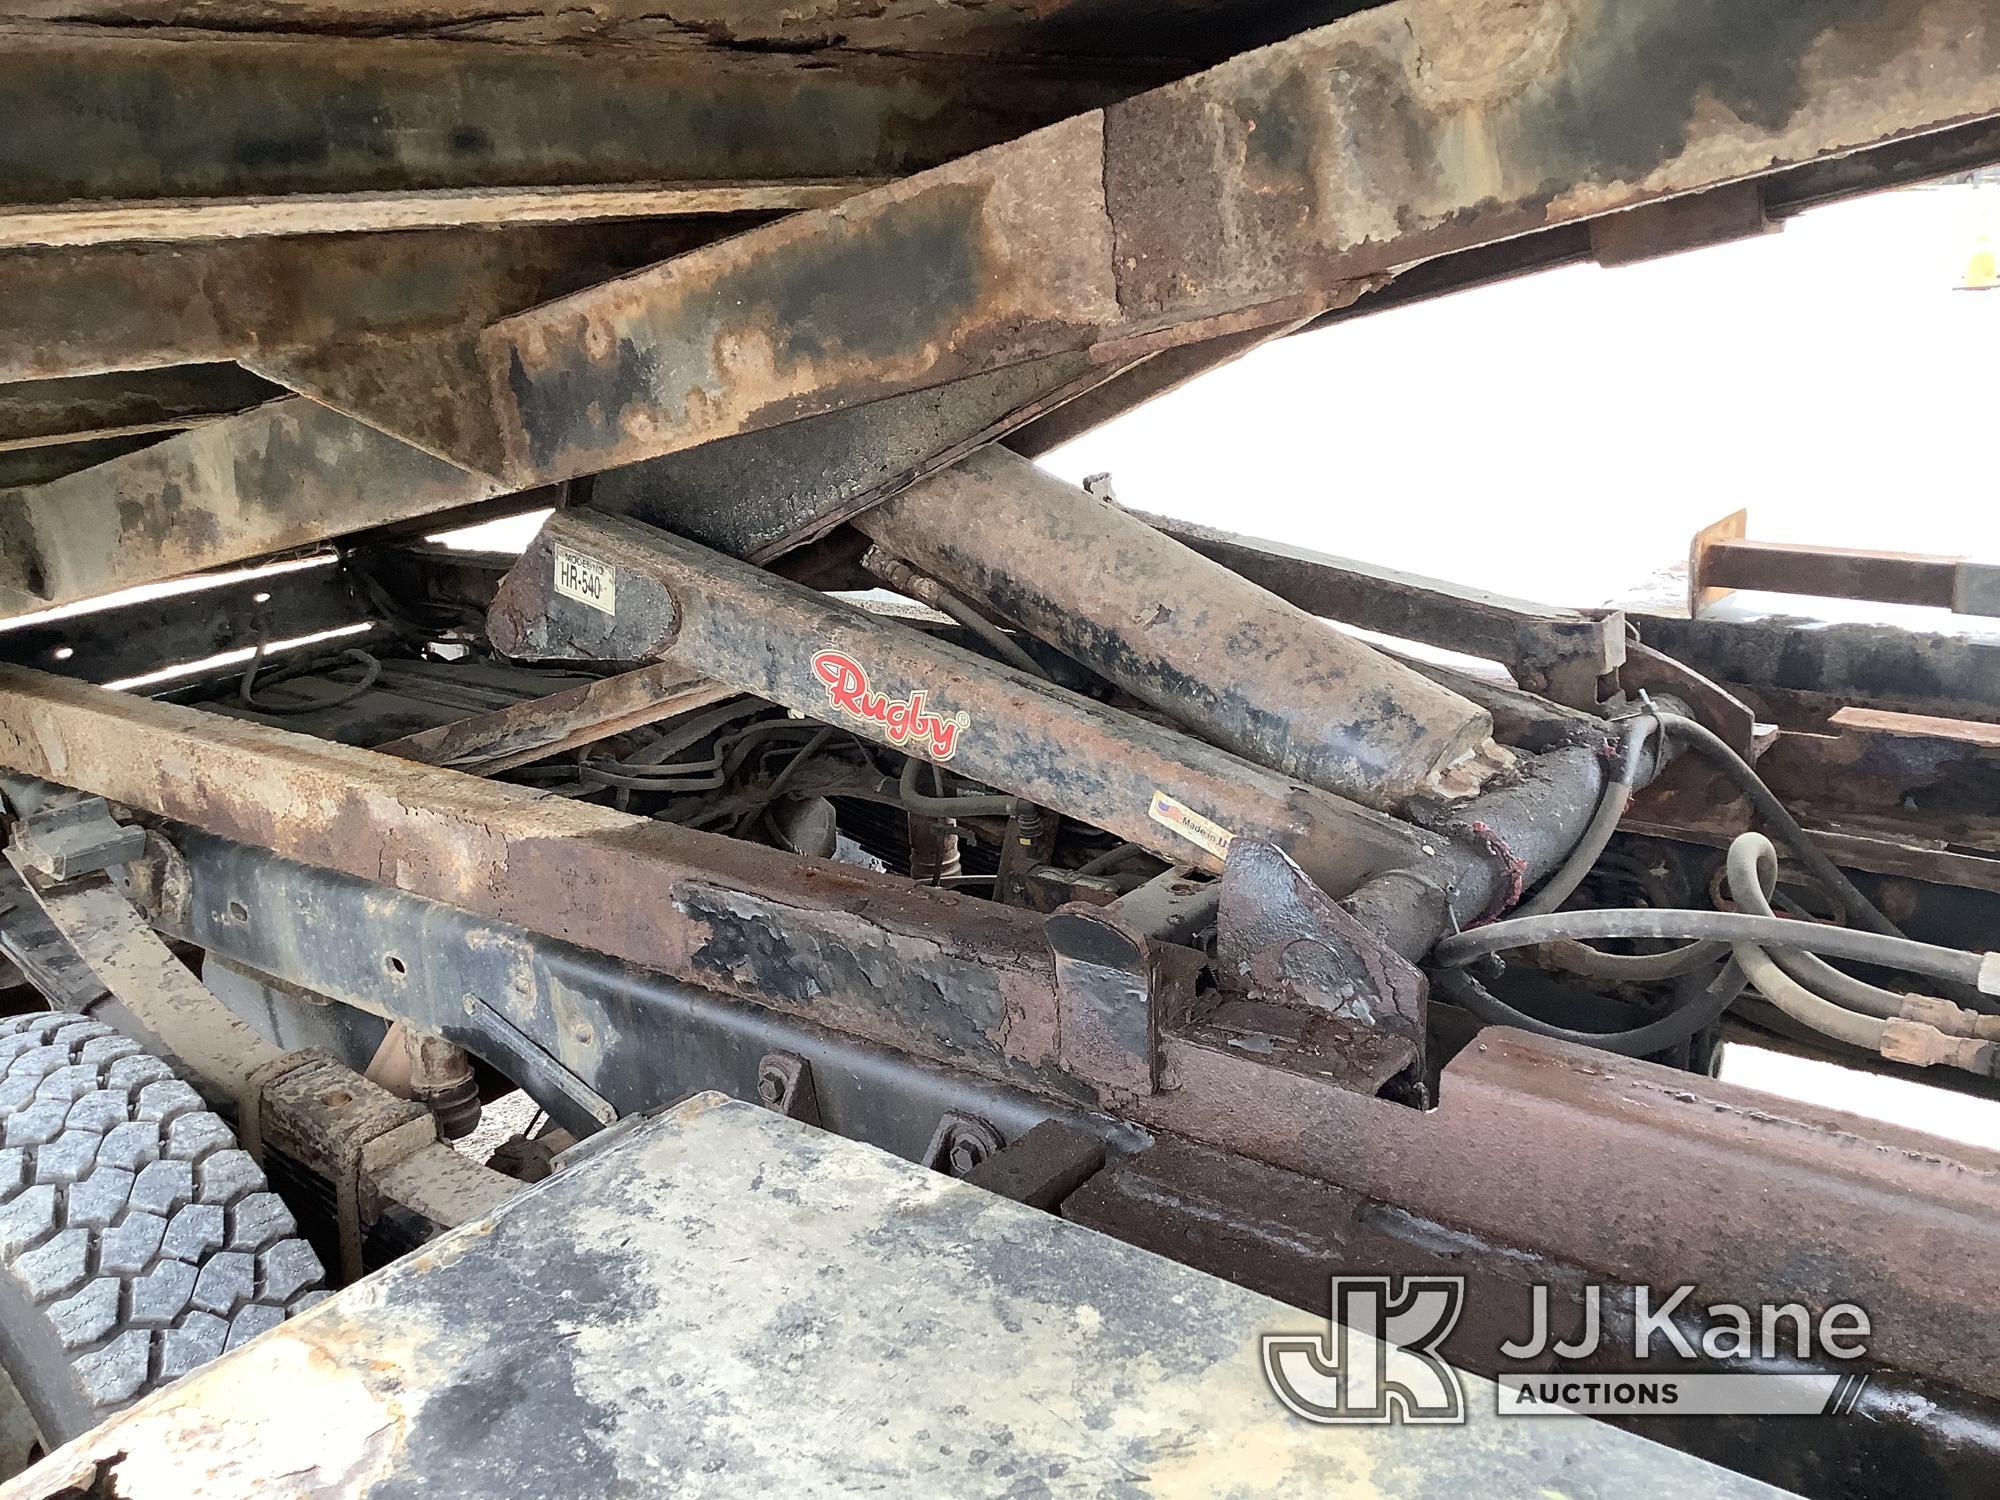 (Smock, PA) 2009 Ford F450 Dump Truck Runs, Moves & Operates, Rust & Body Damage